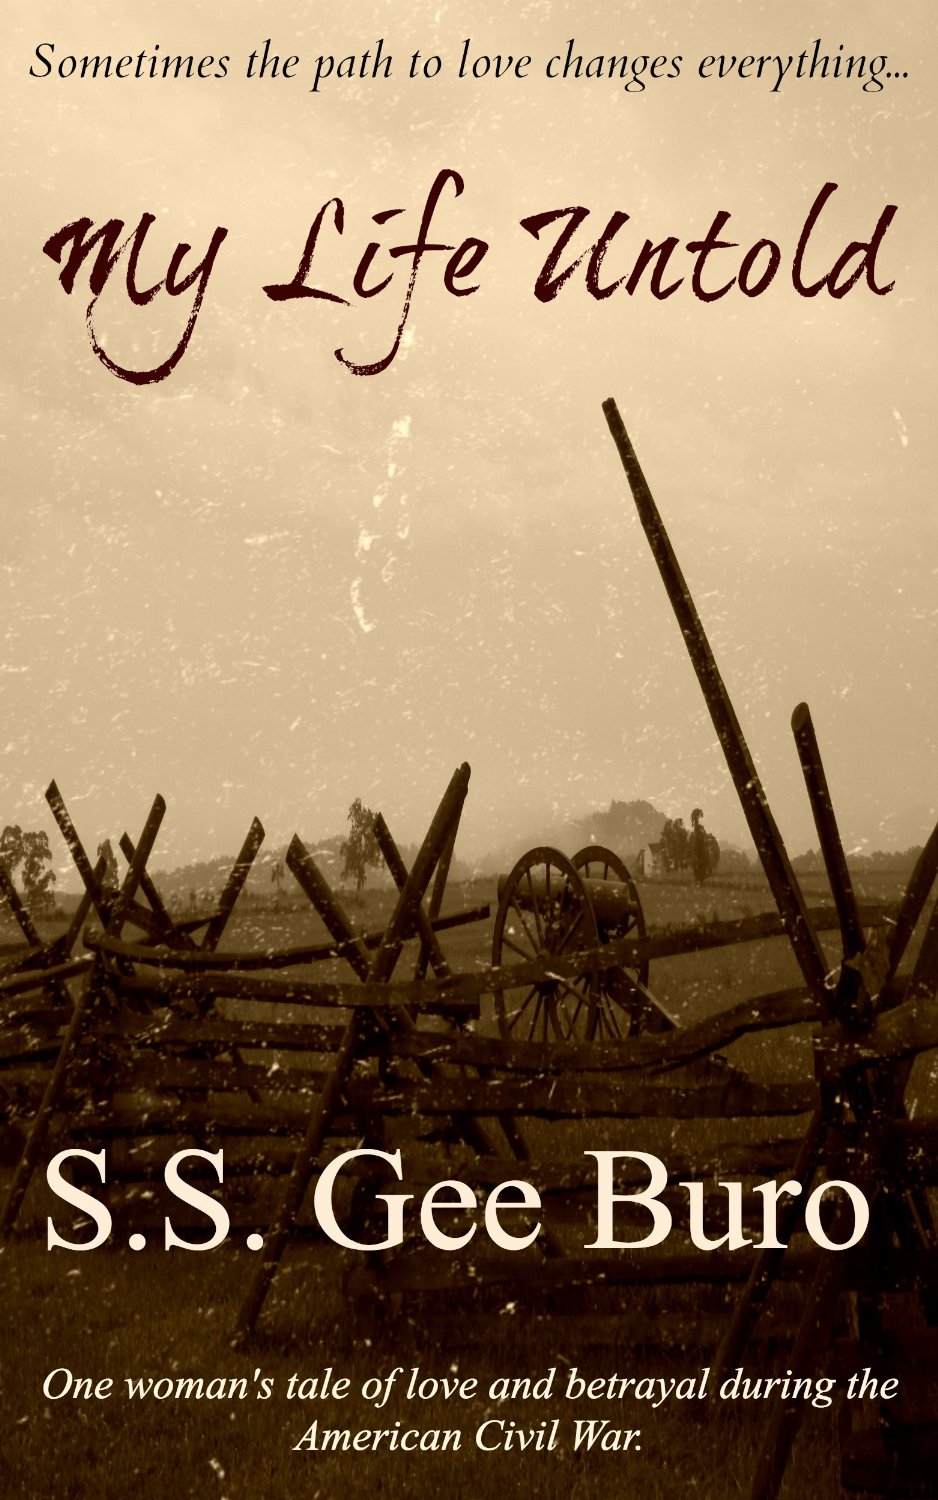 My Life Untold by S.S. Gee Buro